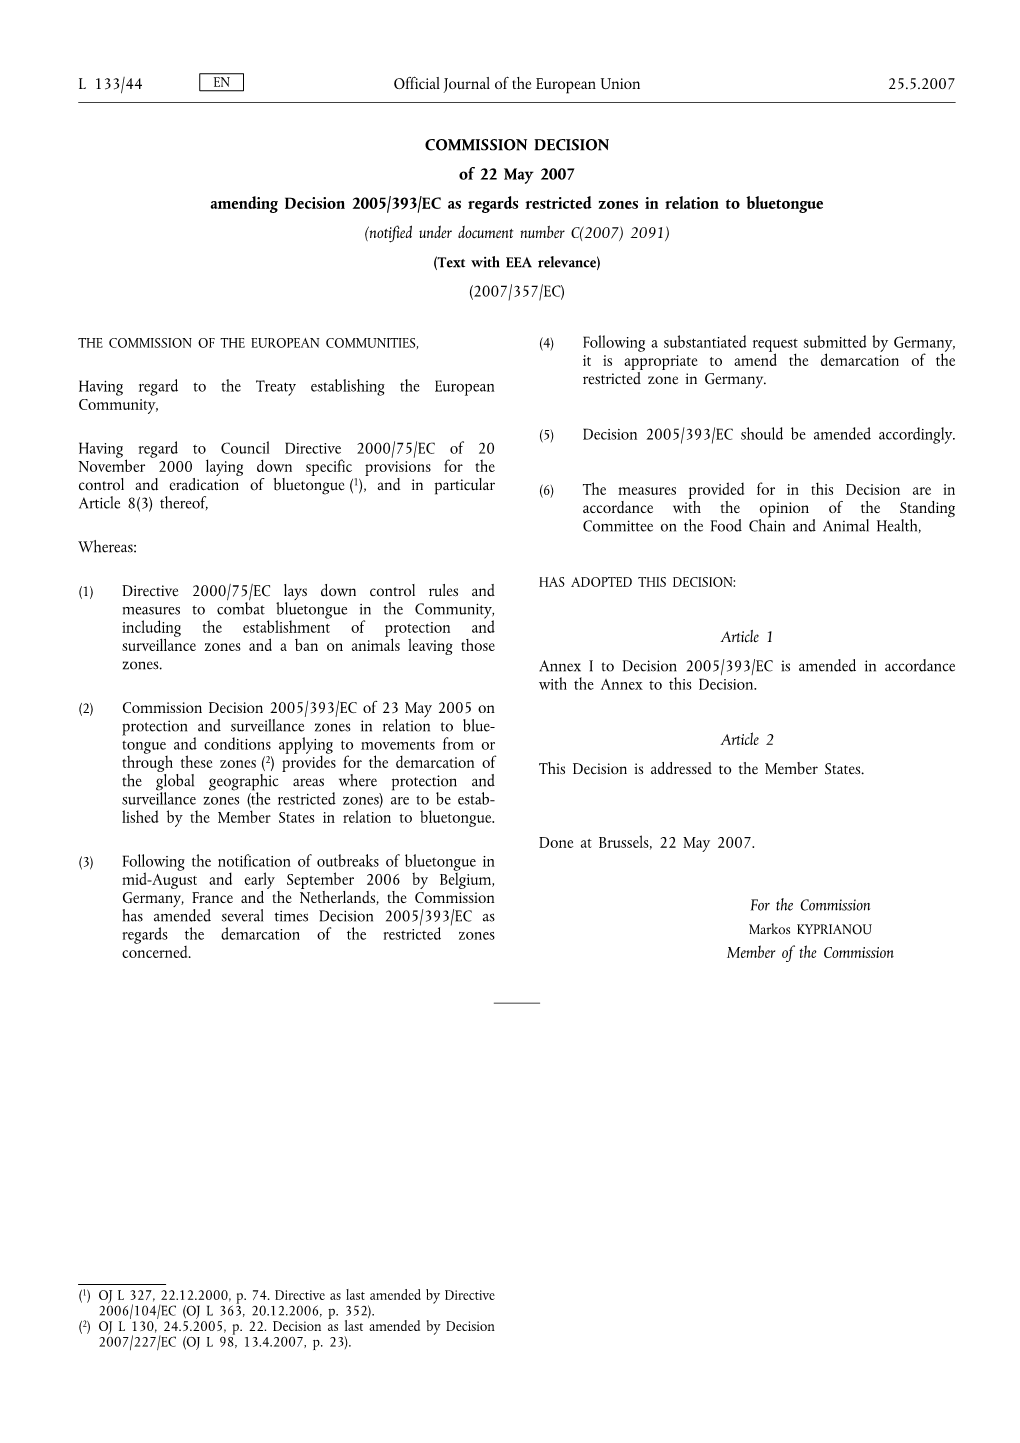 COMMISSION DECISION of 22 May 2007 Amending